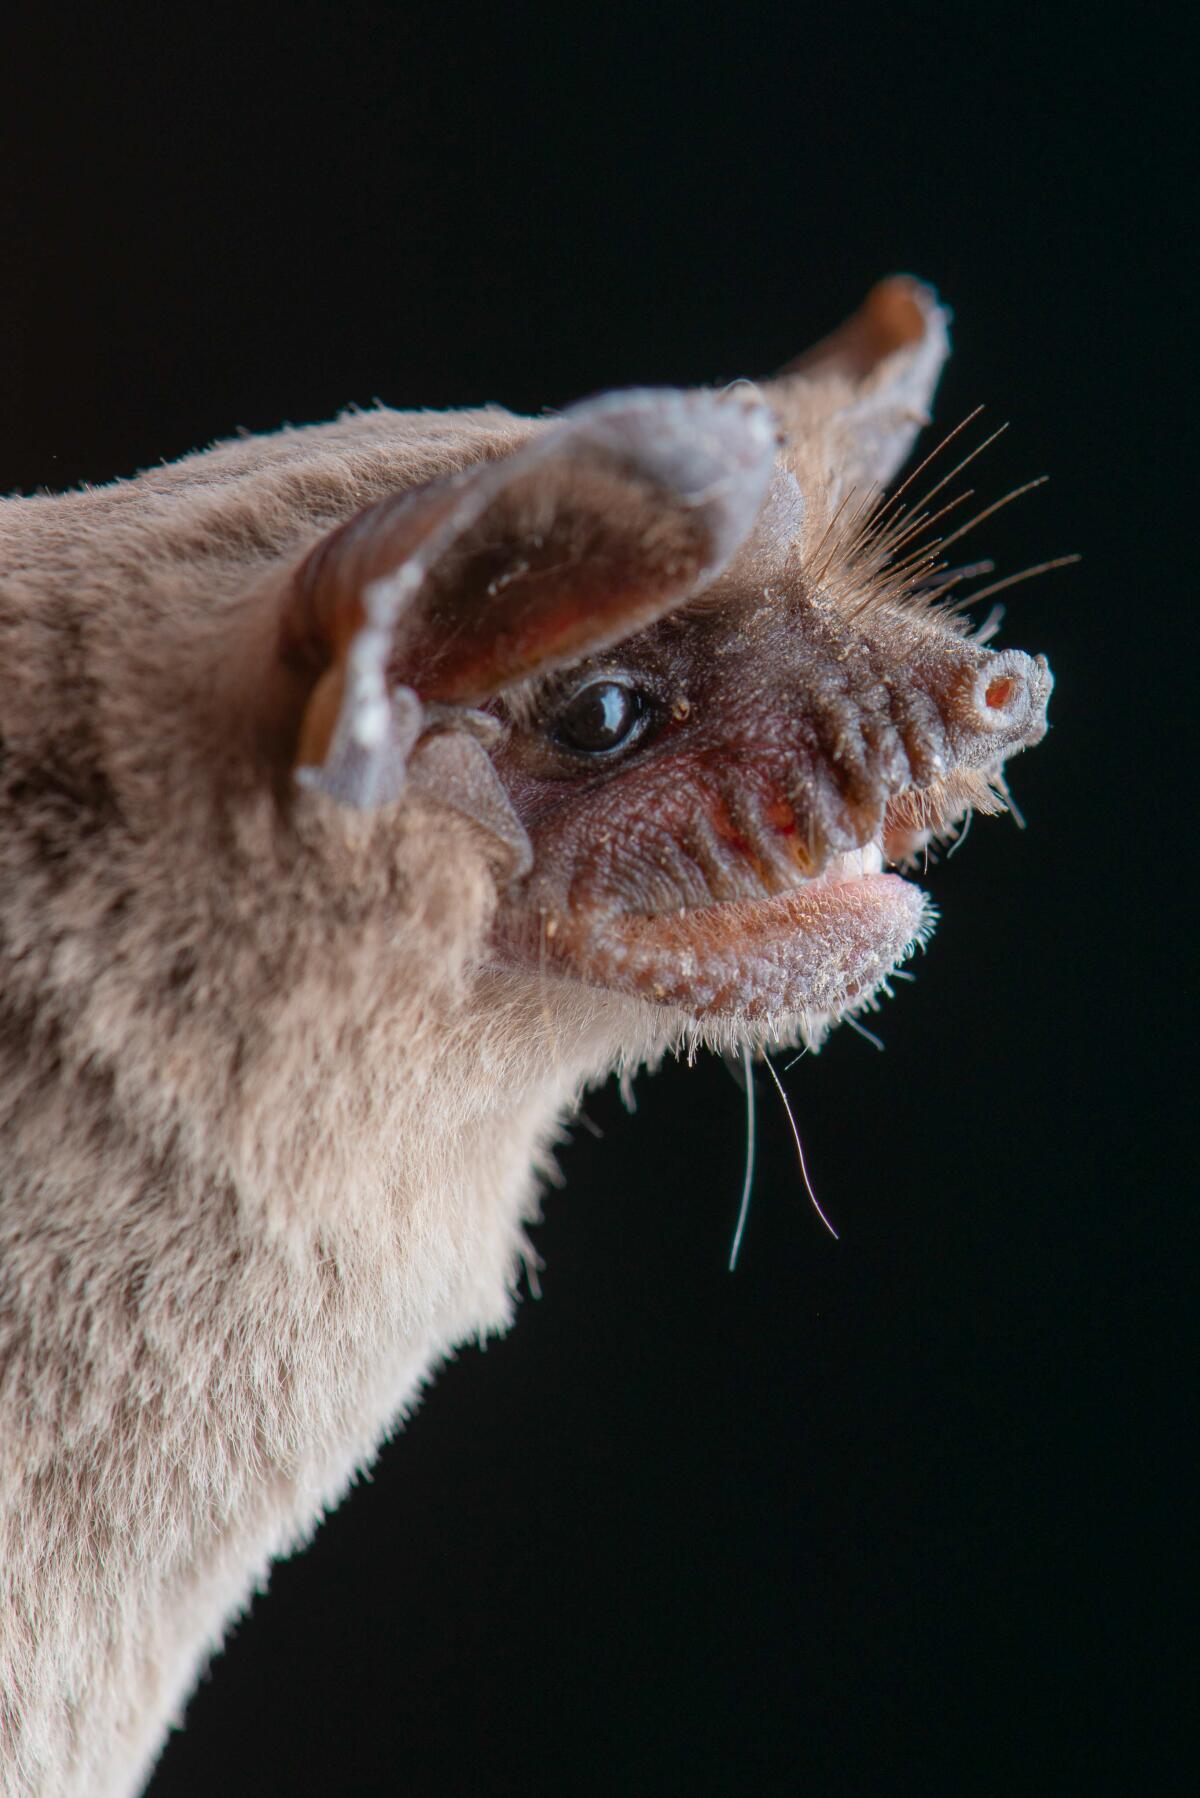 A Mexican free-tailed bat in profile.